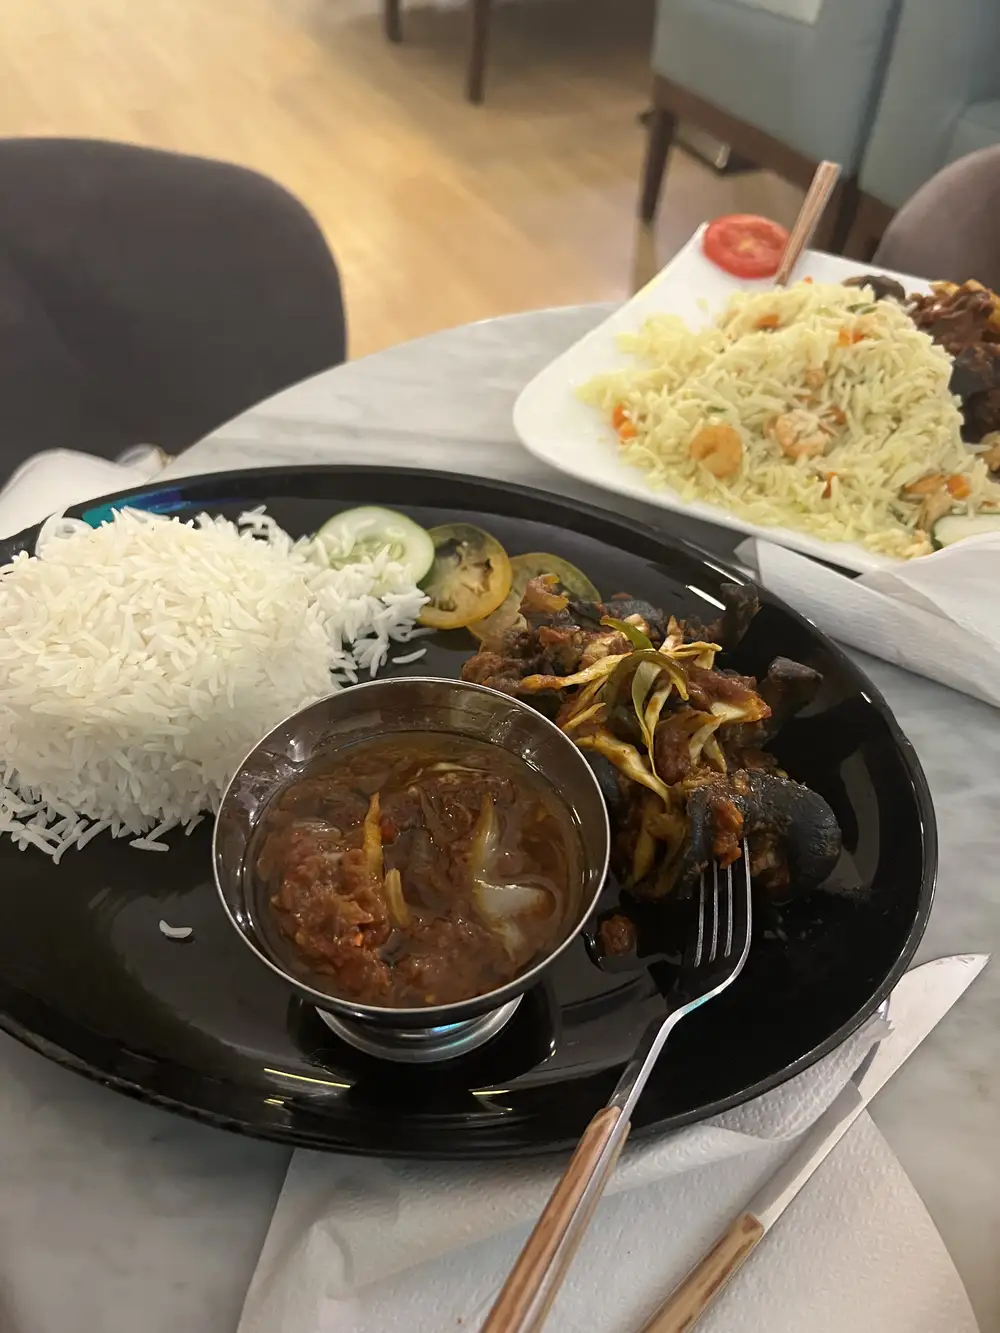 Steamed rice and sauce and peppered snail